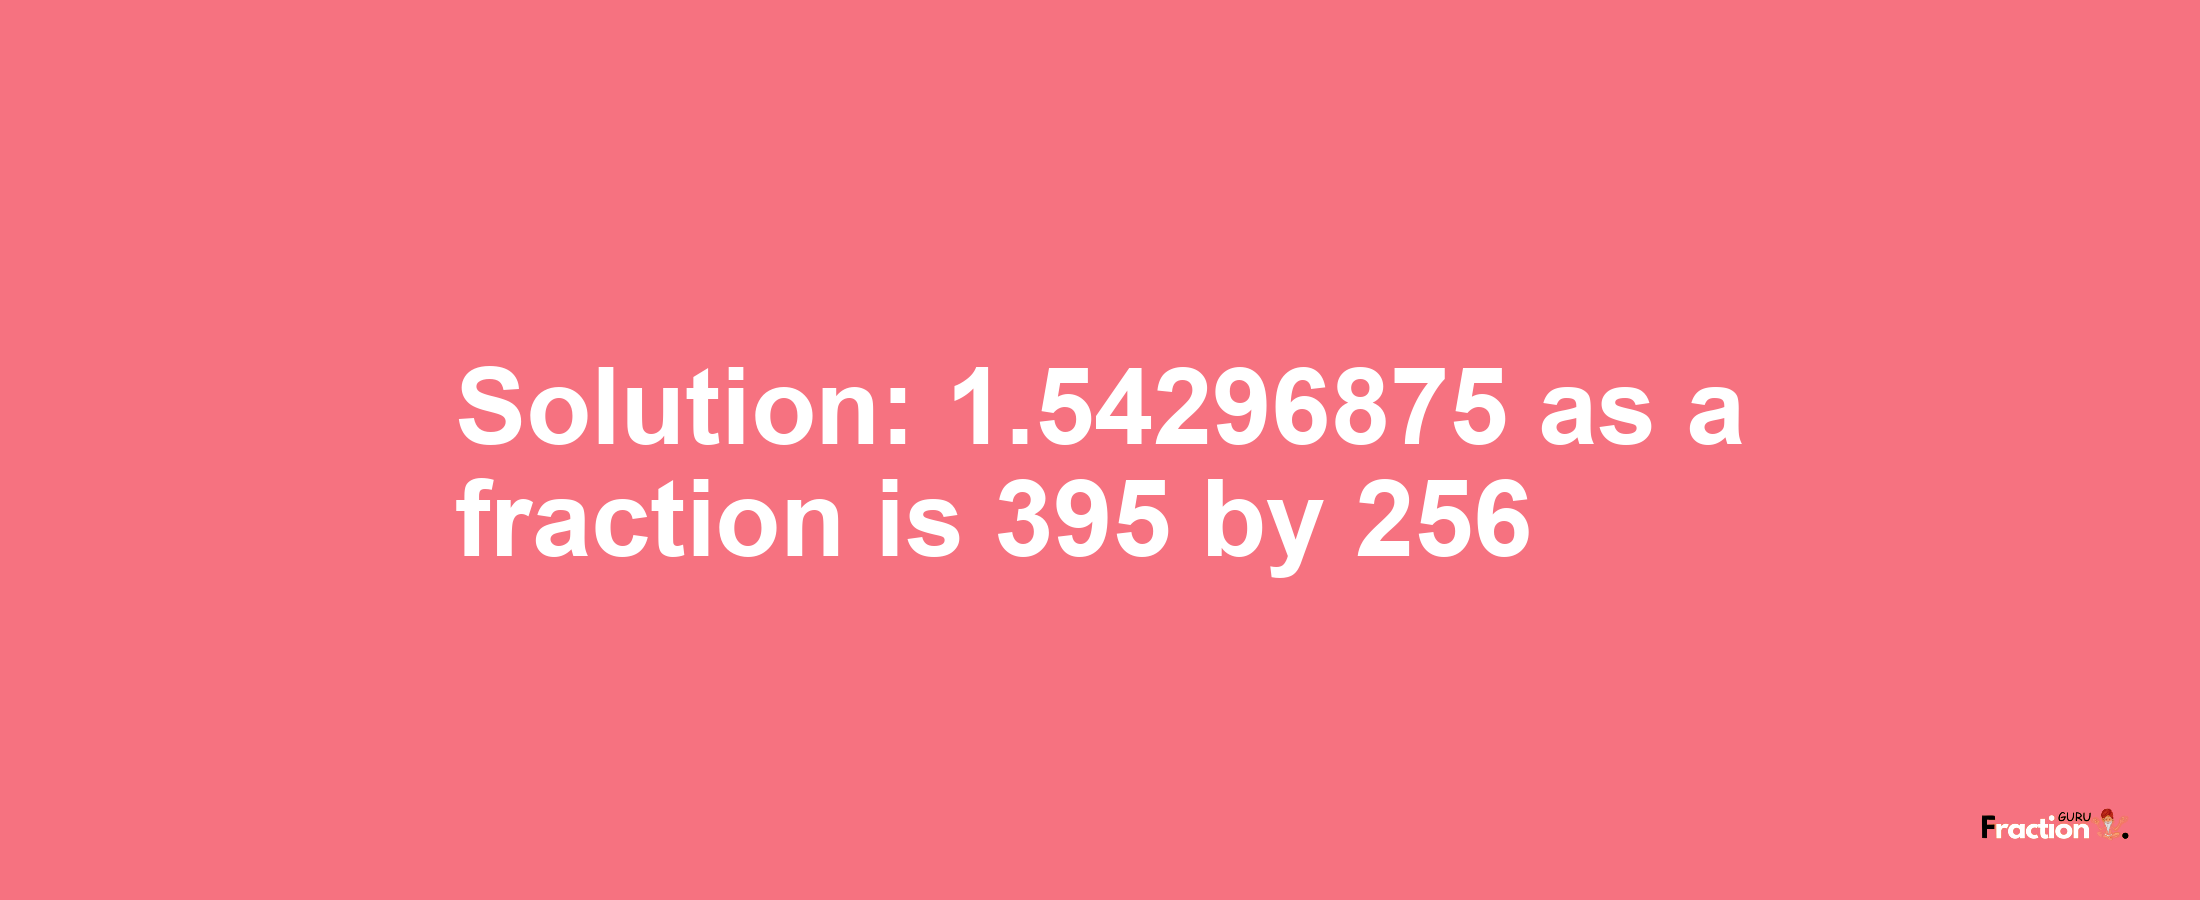 Solution:1.54296875 as a fraction is 395/256